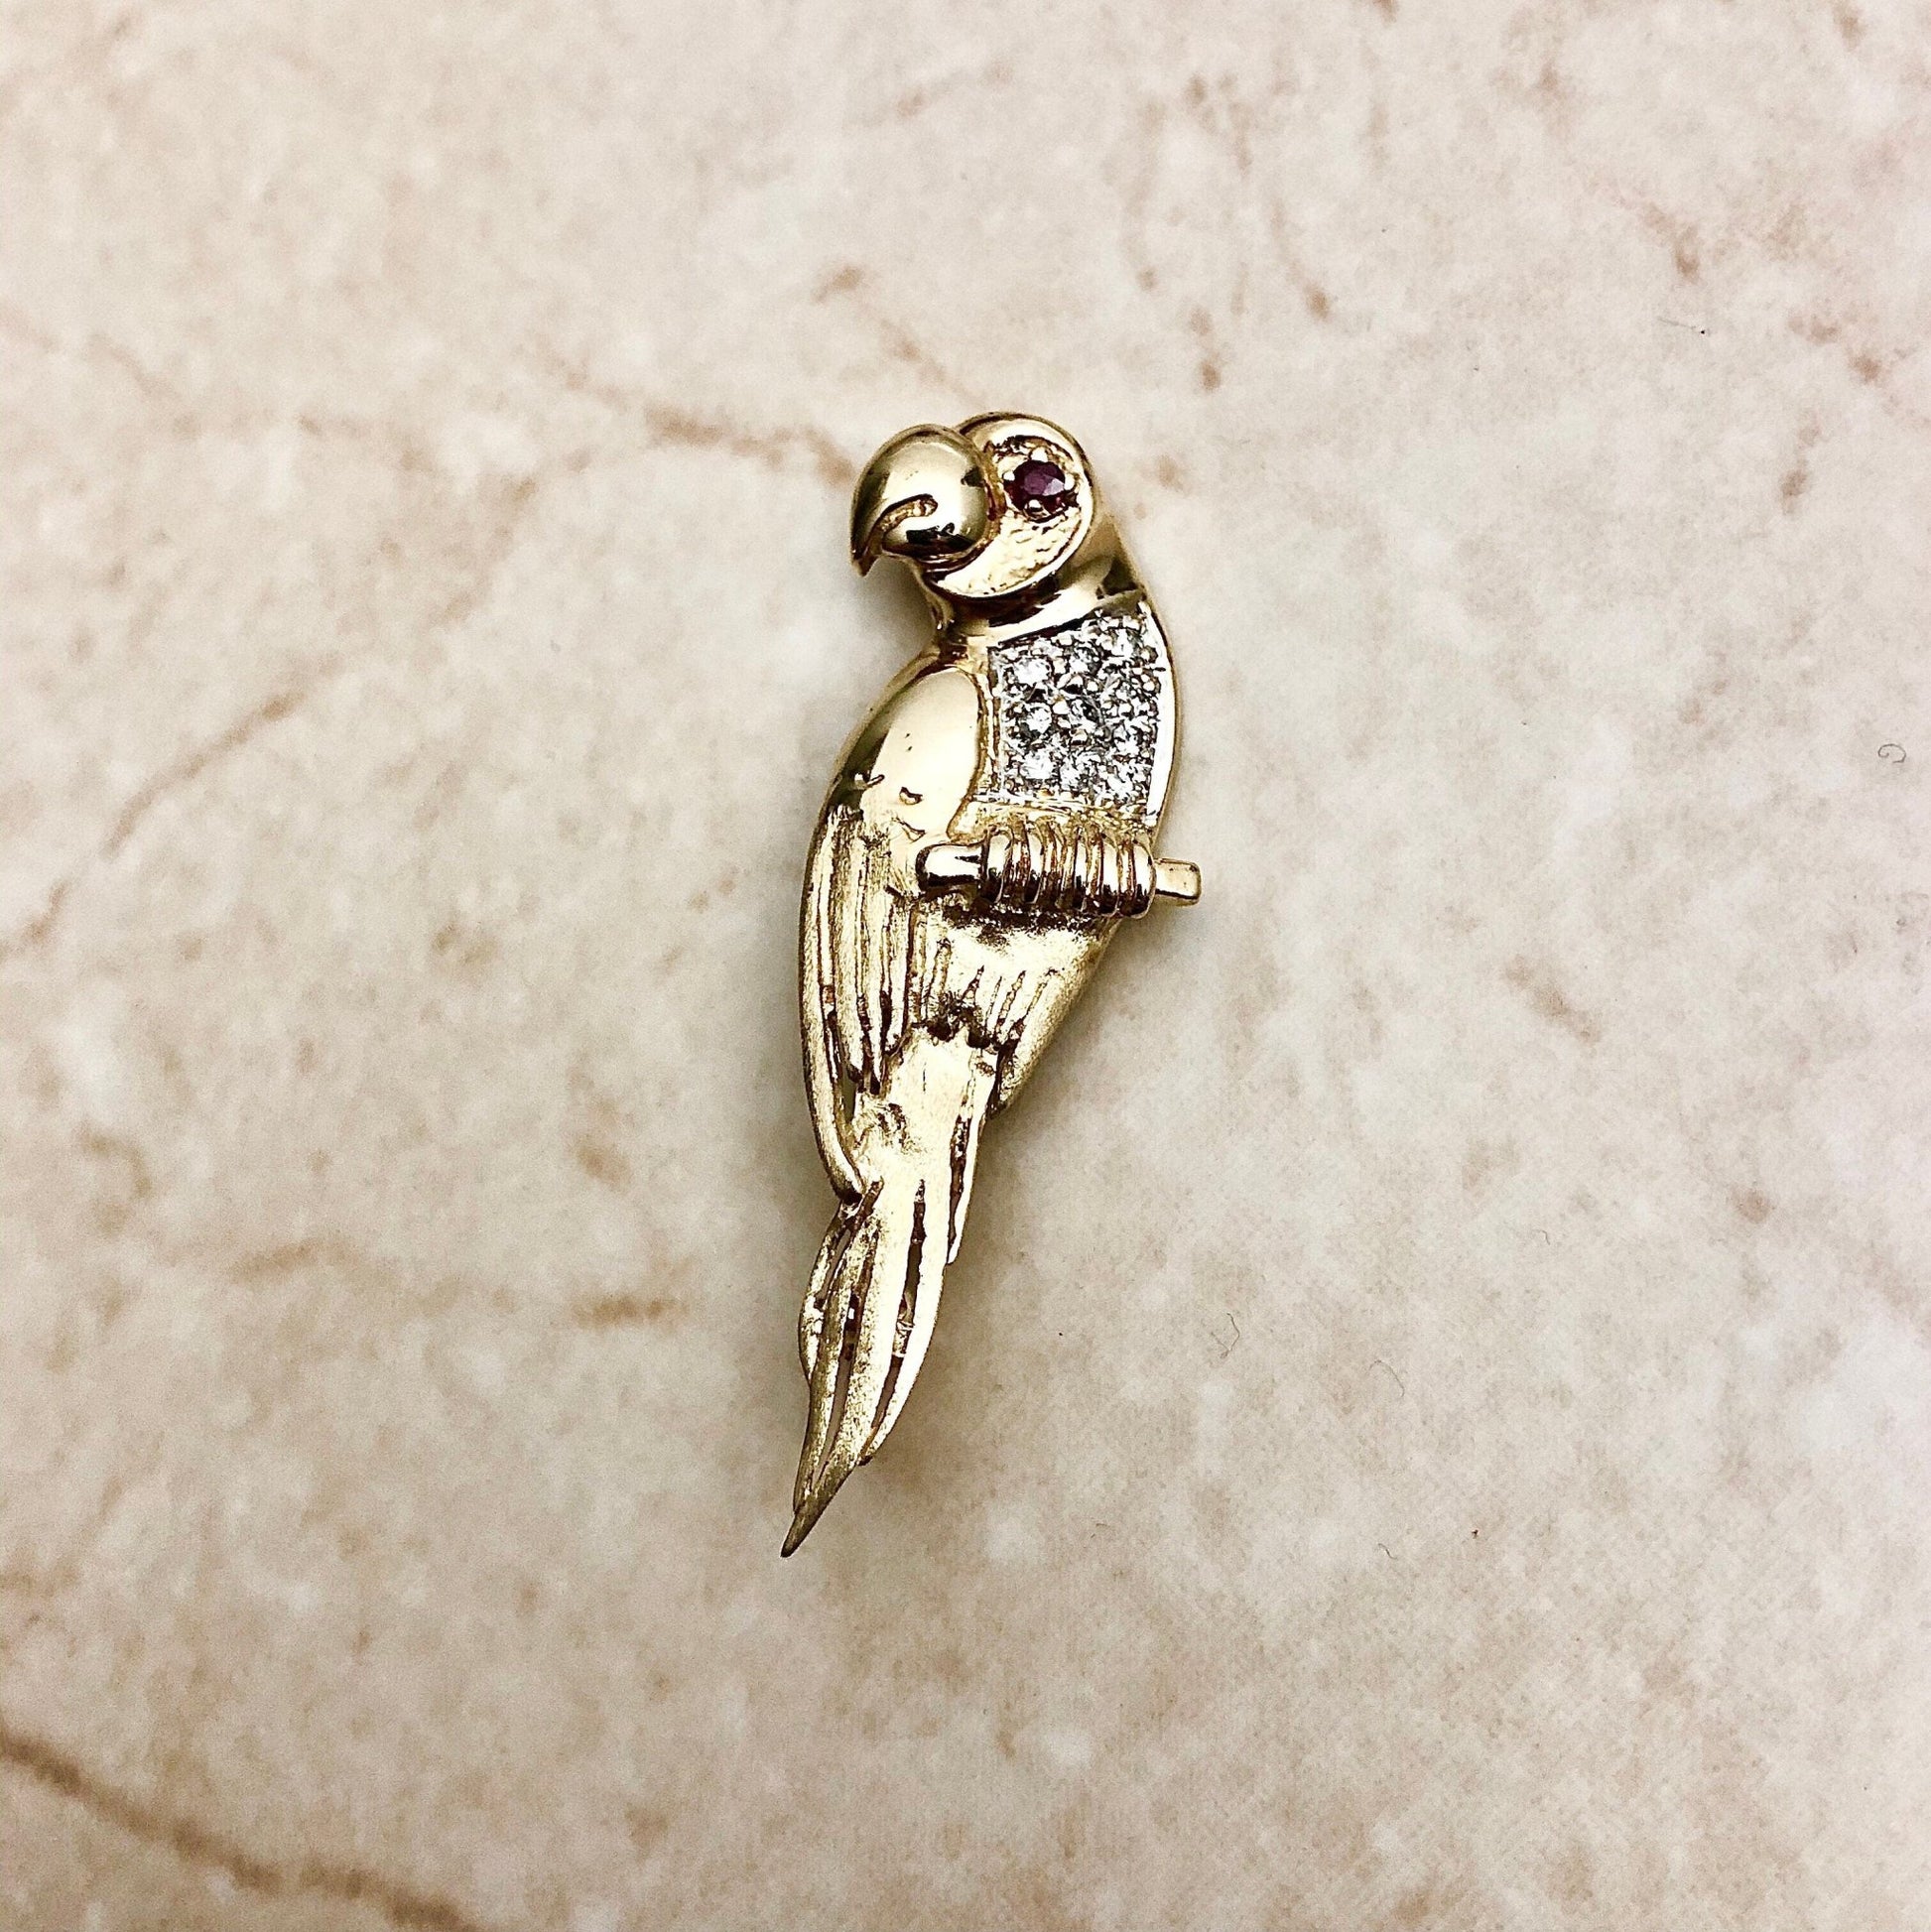 Exquisite Vintage Natural Ruby & Diamond Parrot Brooch - 14K Yellow Gold - Bird Brooch - Gold Pin - Best Gift For Her - Holiday Gift